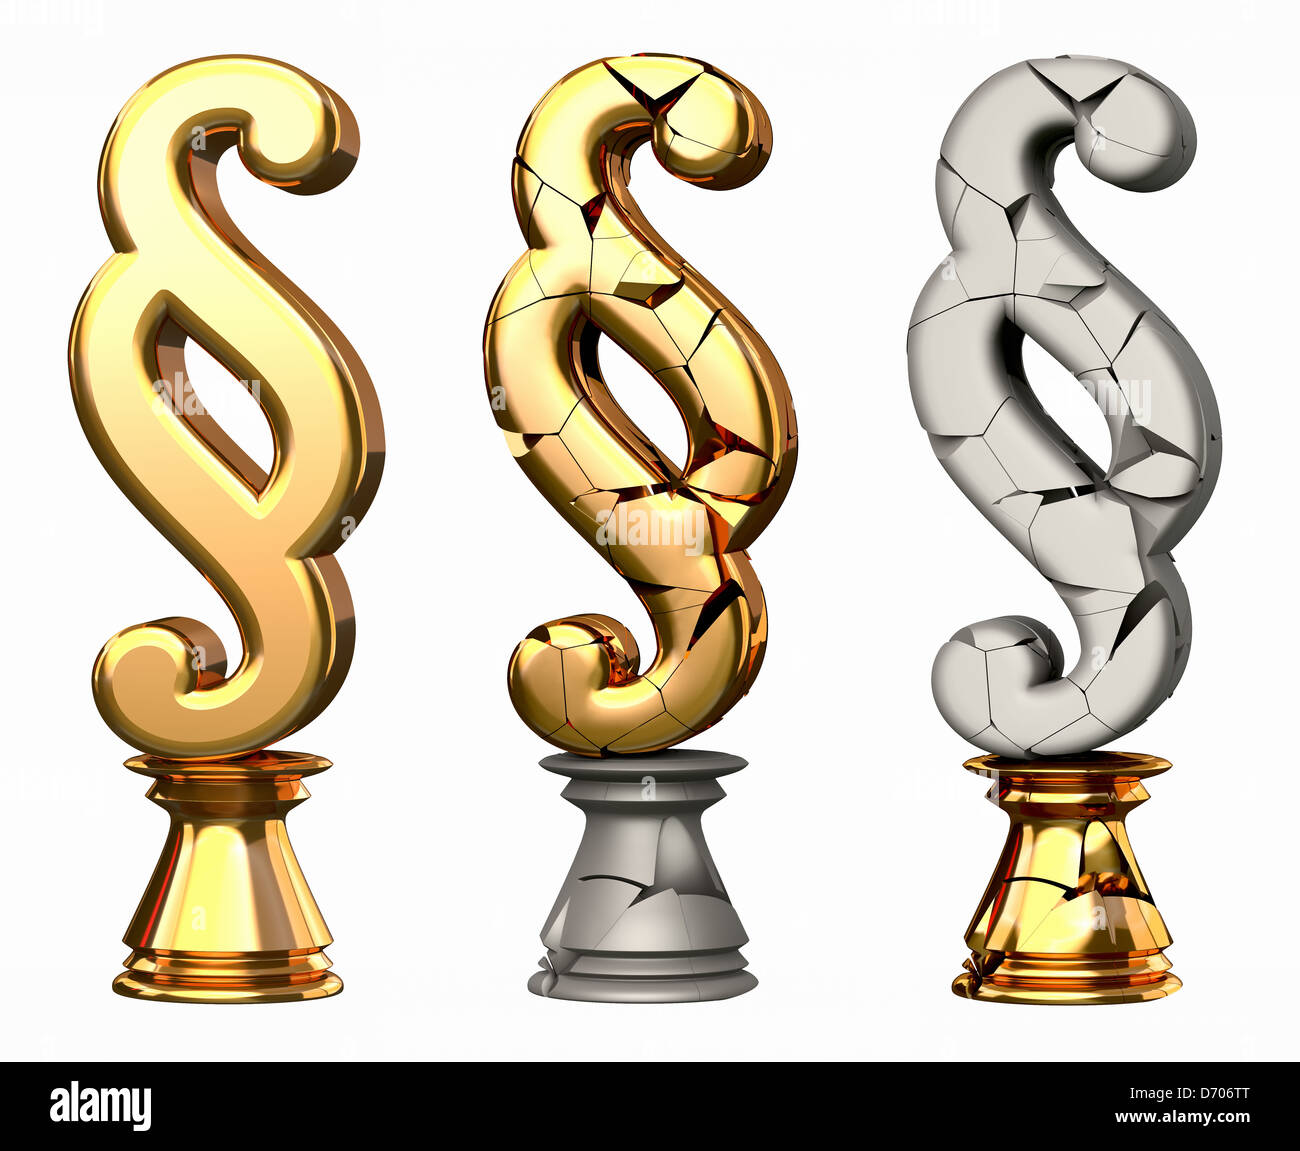 Golden Paragraph symbol of law Stock Photo